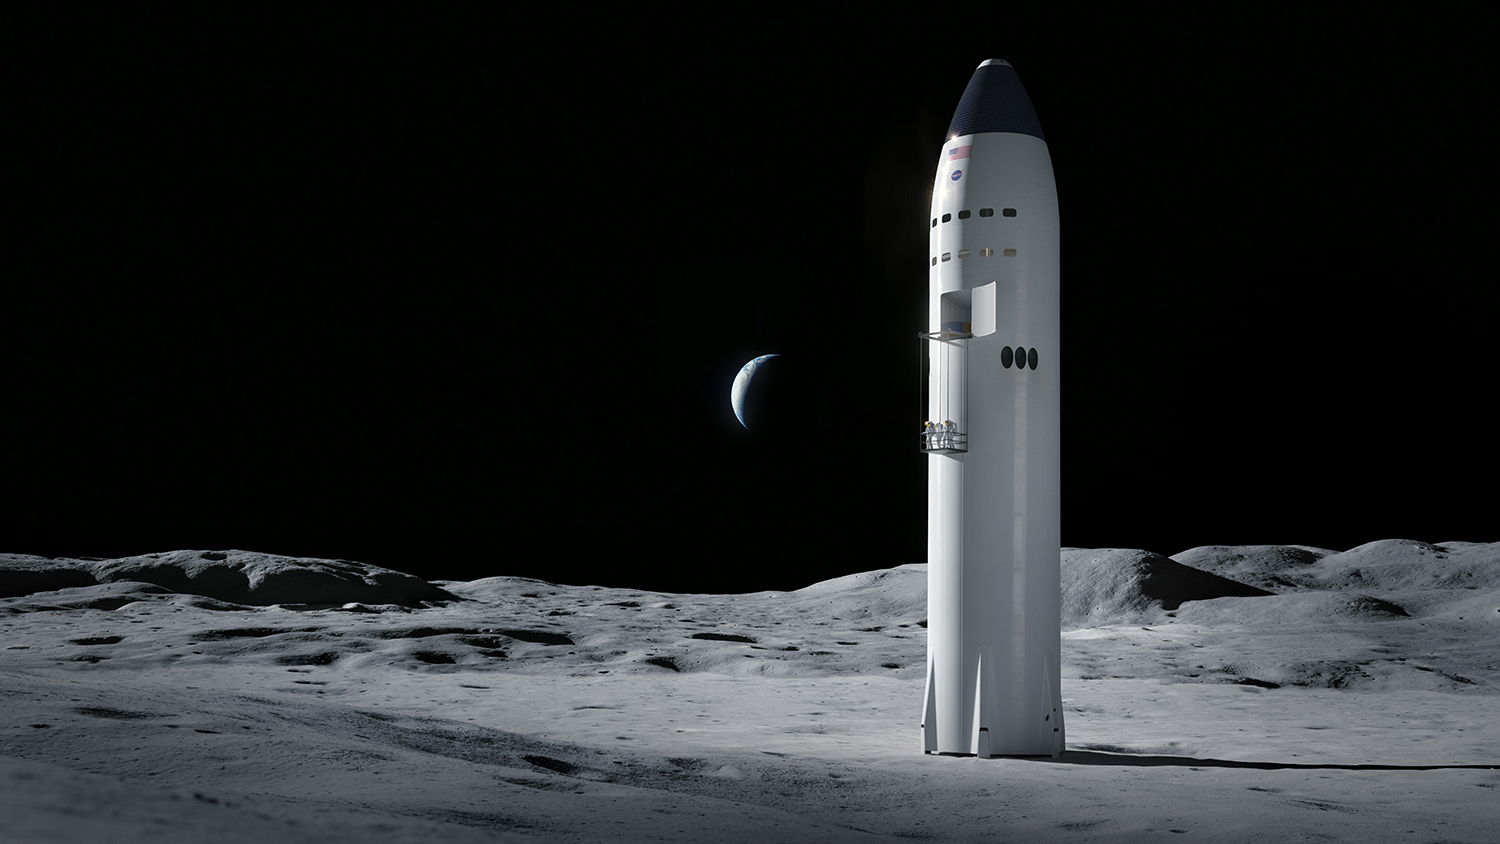 NASA inks deal with SpaceX for second crewed lunar
landing